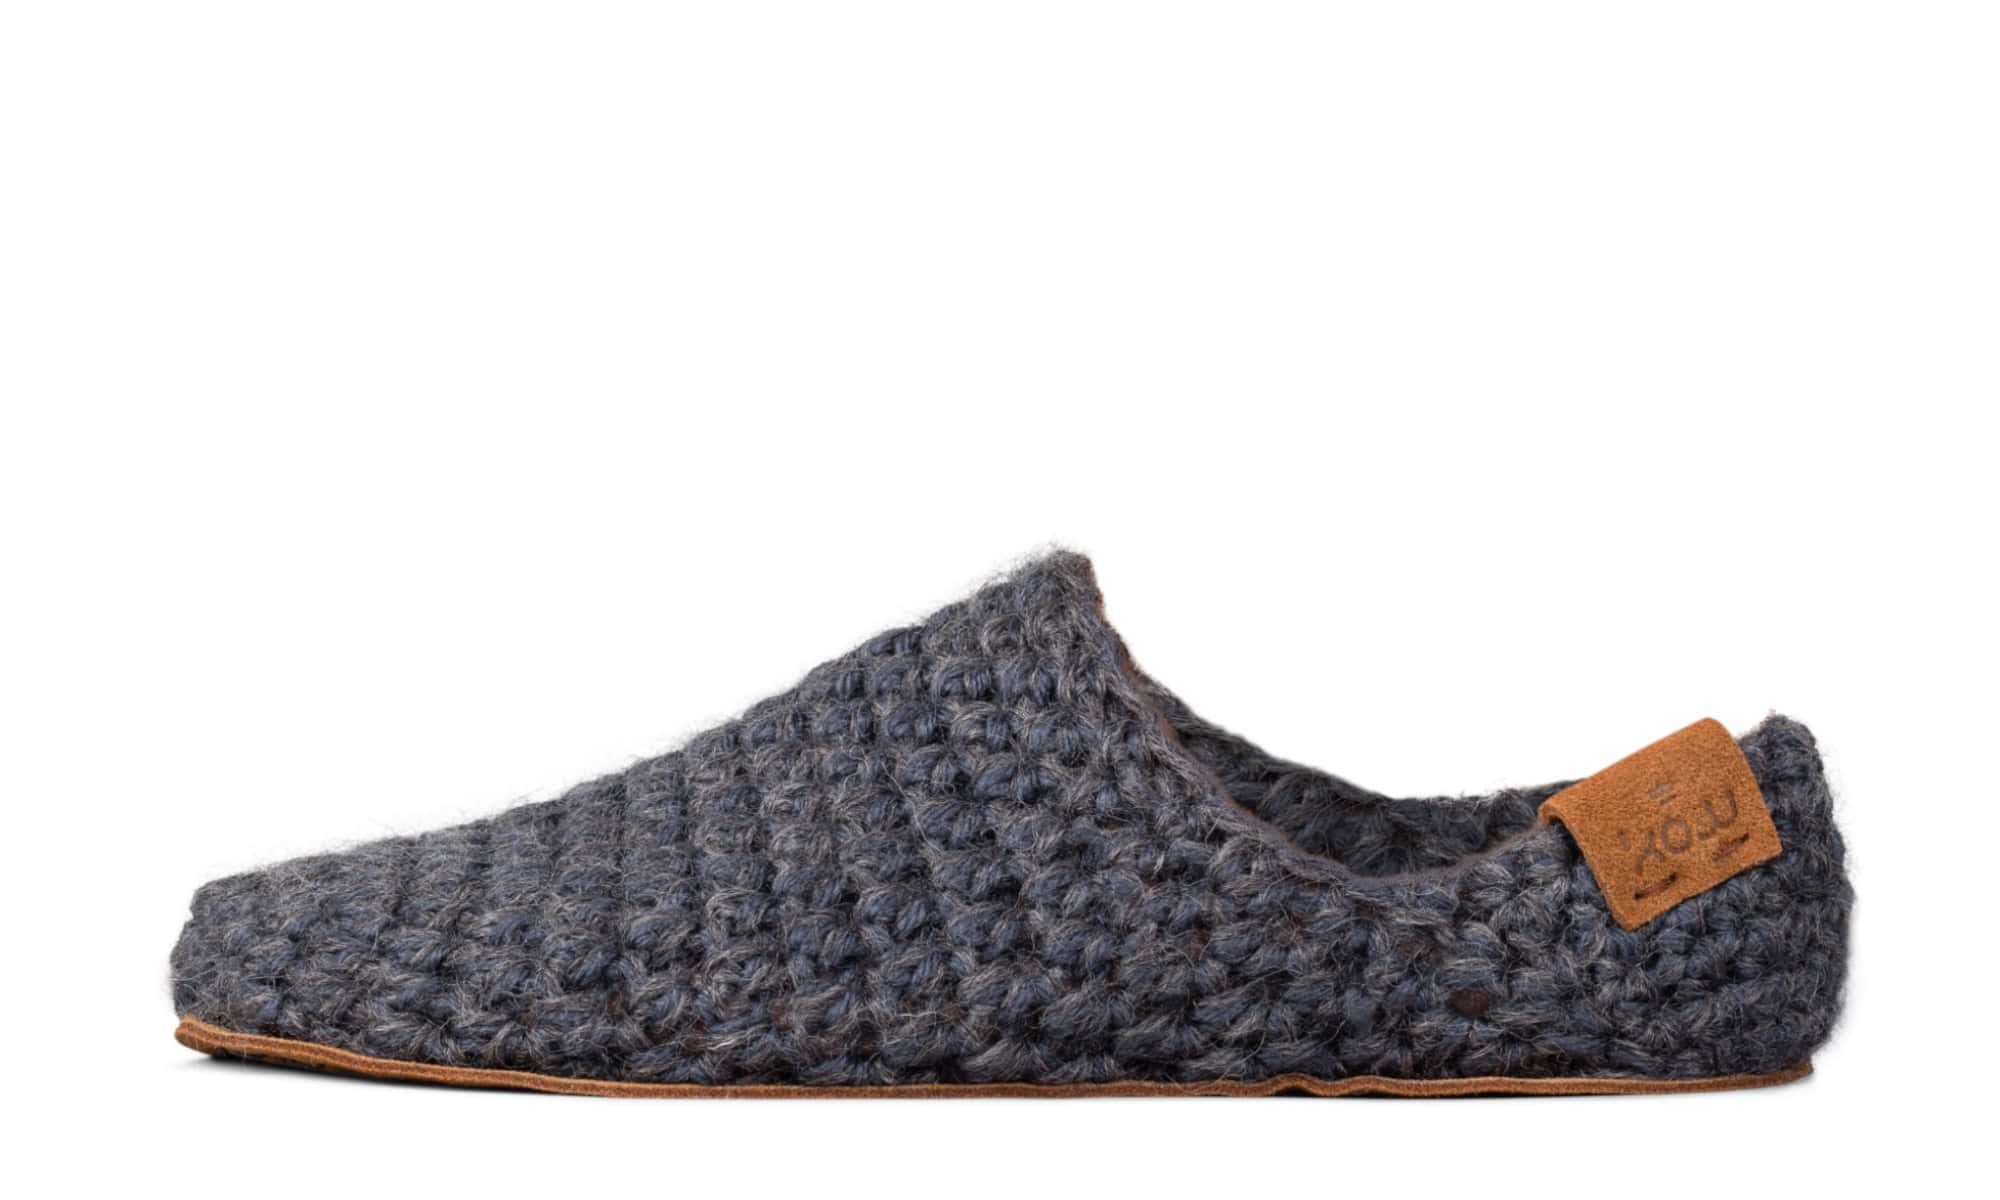 Handmade Wool Bamboo Summer Slippers in Charcoal Grey for Men and Women